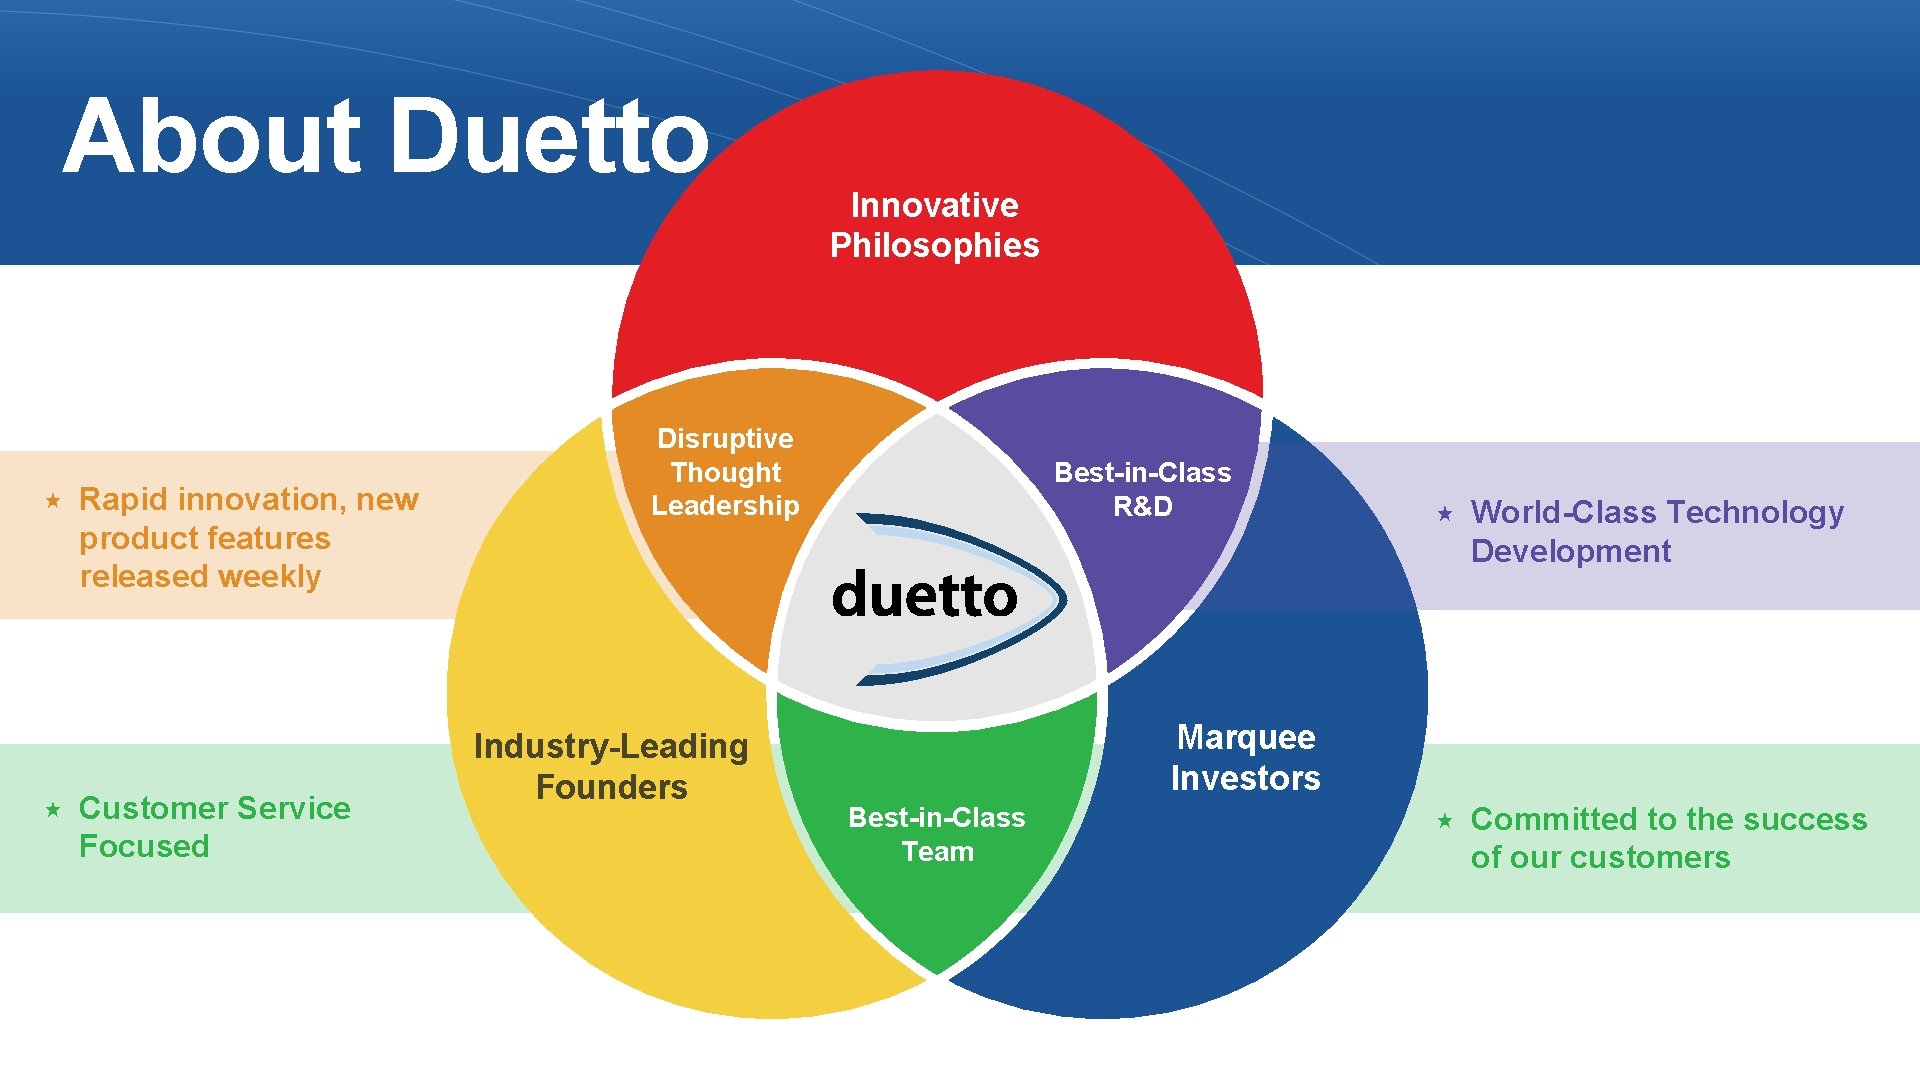 About Duetto Rapid innovation, new product features released weekly Customer Service Focused Innovative Philosophies